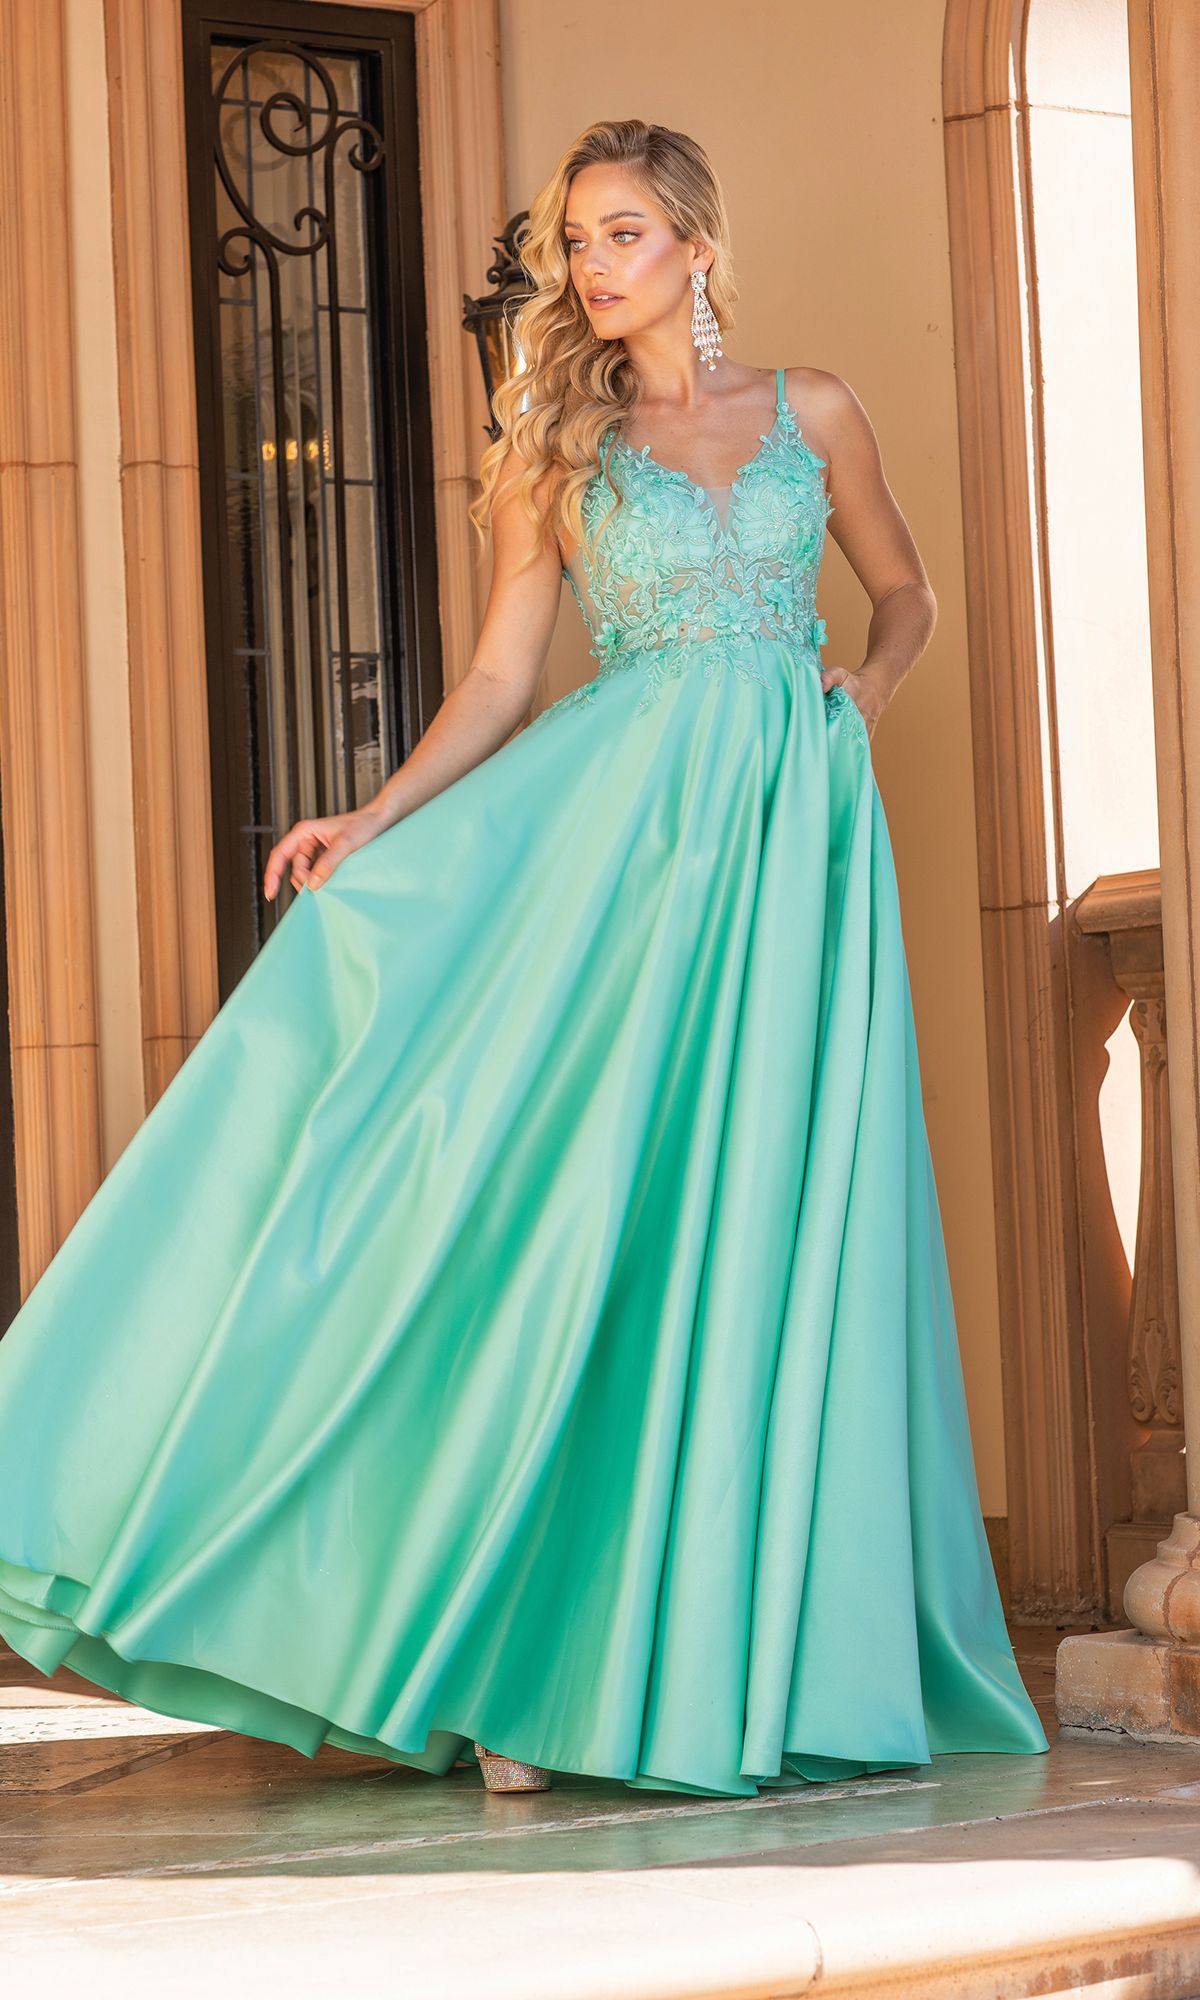 A-Line Ball Gown With Sheer Bodice